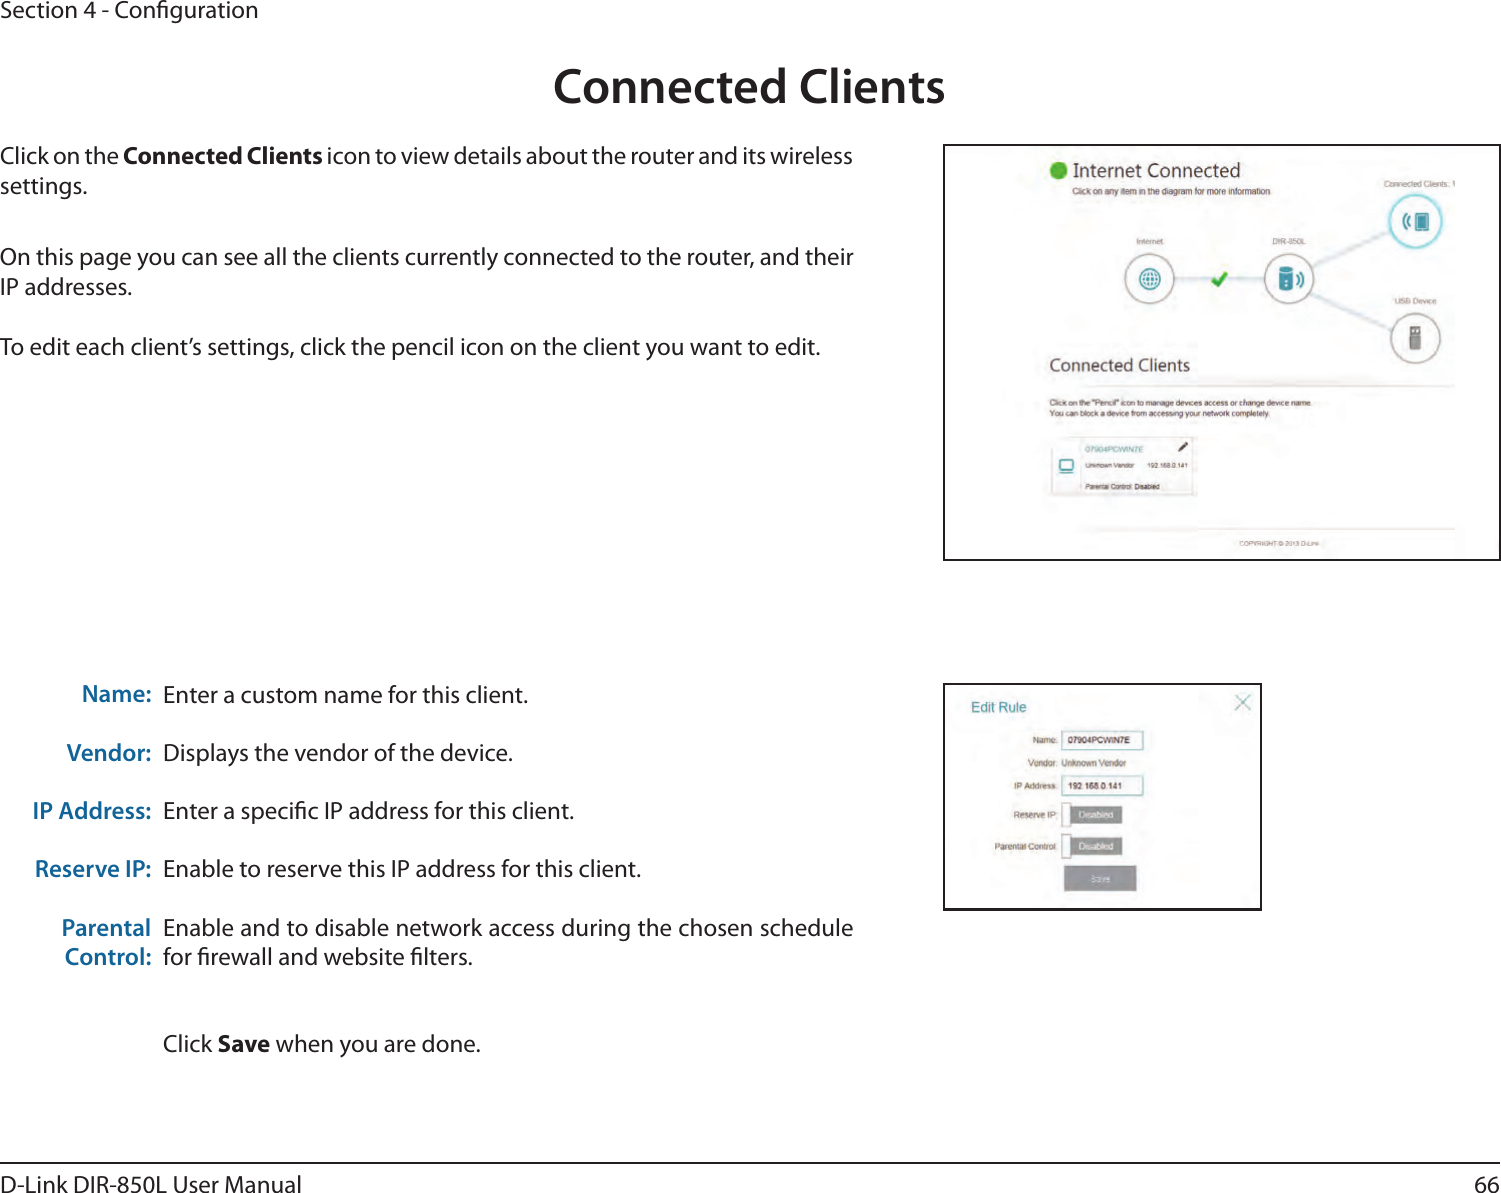 66D-Link DIR-850L User ManualSection 4 - CongurationConnected ClientsClick on the Connected Clients icon to view details about the router and its wireless settings.On this page you can see all the clients currently connected to the router, and their IP addresses.To edit each client’s settings, click the pencil icon on the client you want to edit.Enter a custom name for this client.Displays the vendor of the device.Enter a specic IP address for this client.Enable to reserve this IP address for this client.Enable and to disable network access during the chosen schedule for rewall and website lters.Click Save when you are done.Name:Vendor:IP Address:Reserve IP:Parental Control: